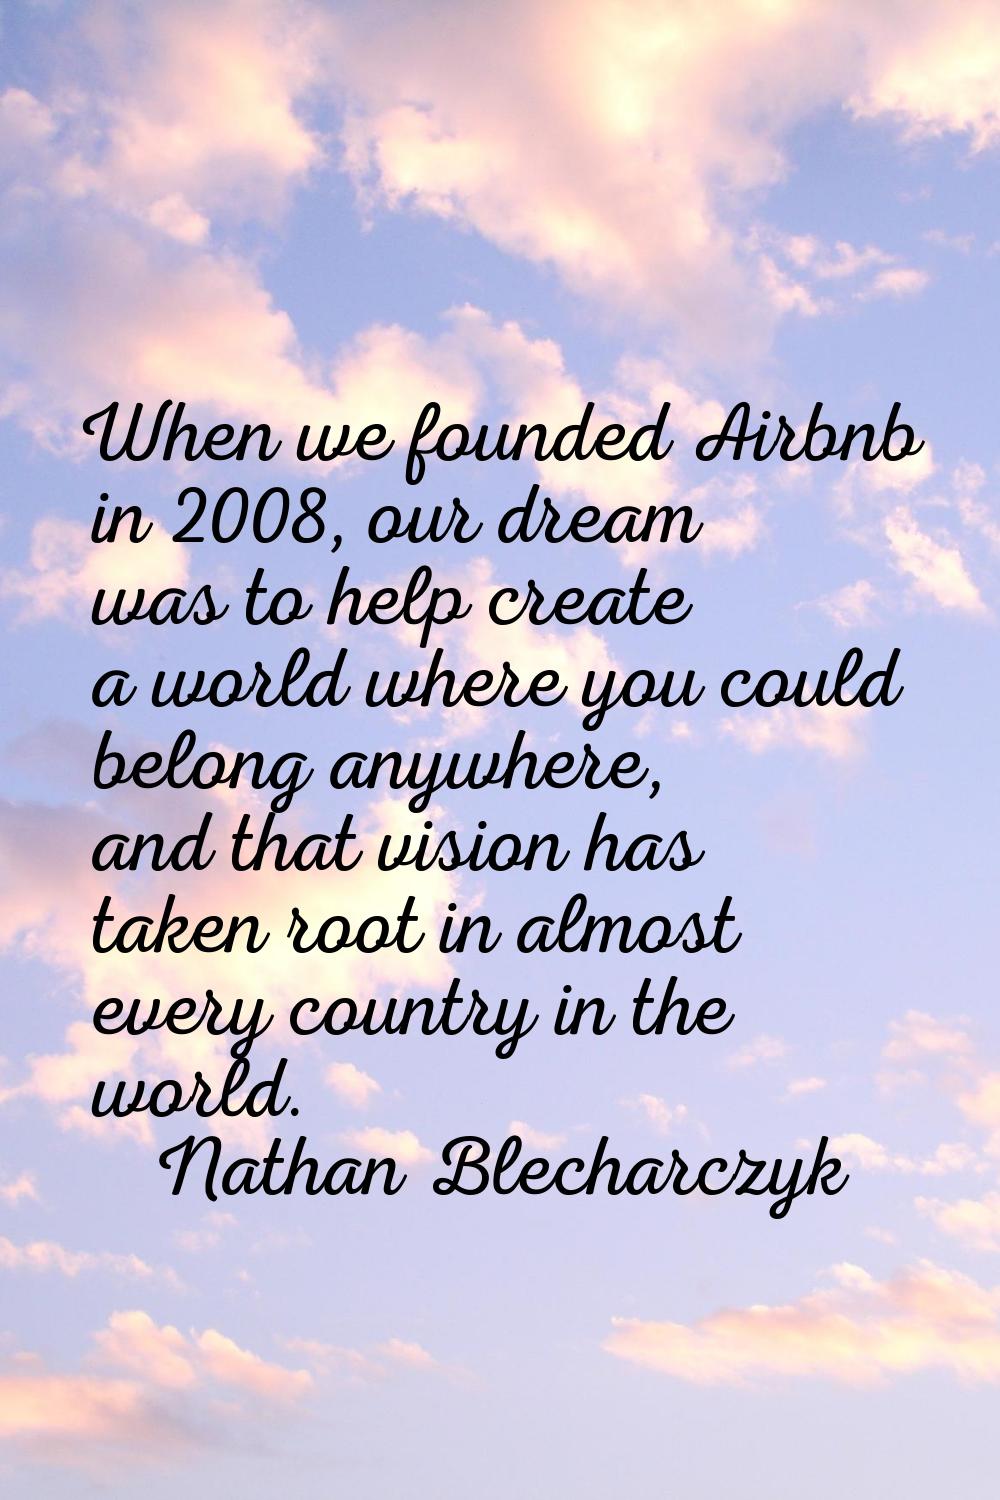 When we founded Airbnb in 2008, our dream was to help create a world where you could belong anywher